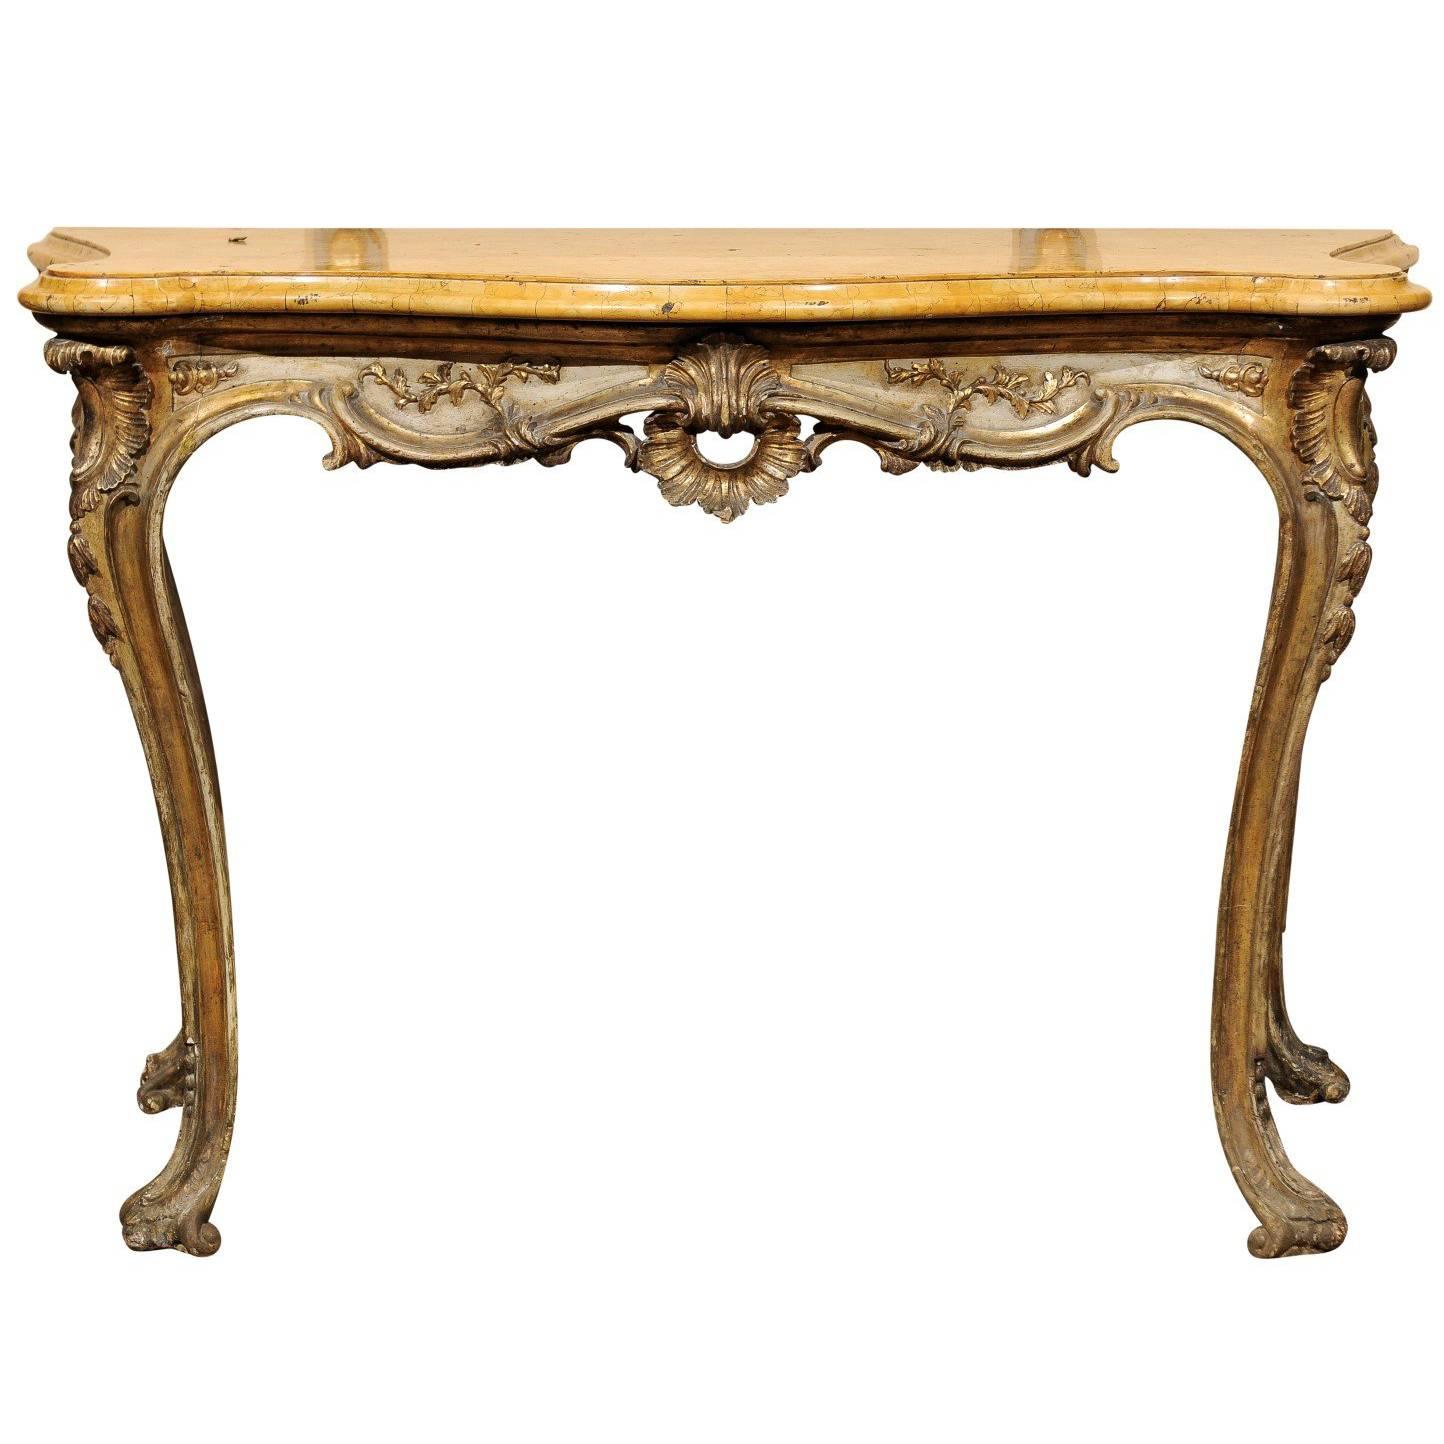 Large Rococo Silvered Italian Console with Sienna Marble, 18th Century For Sale